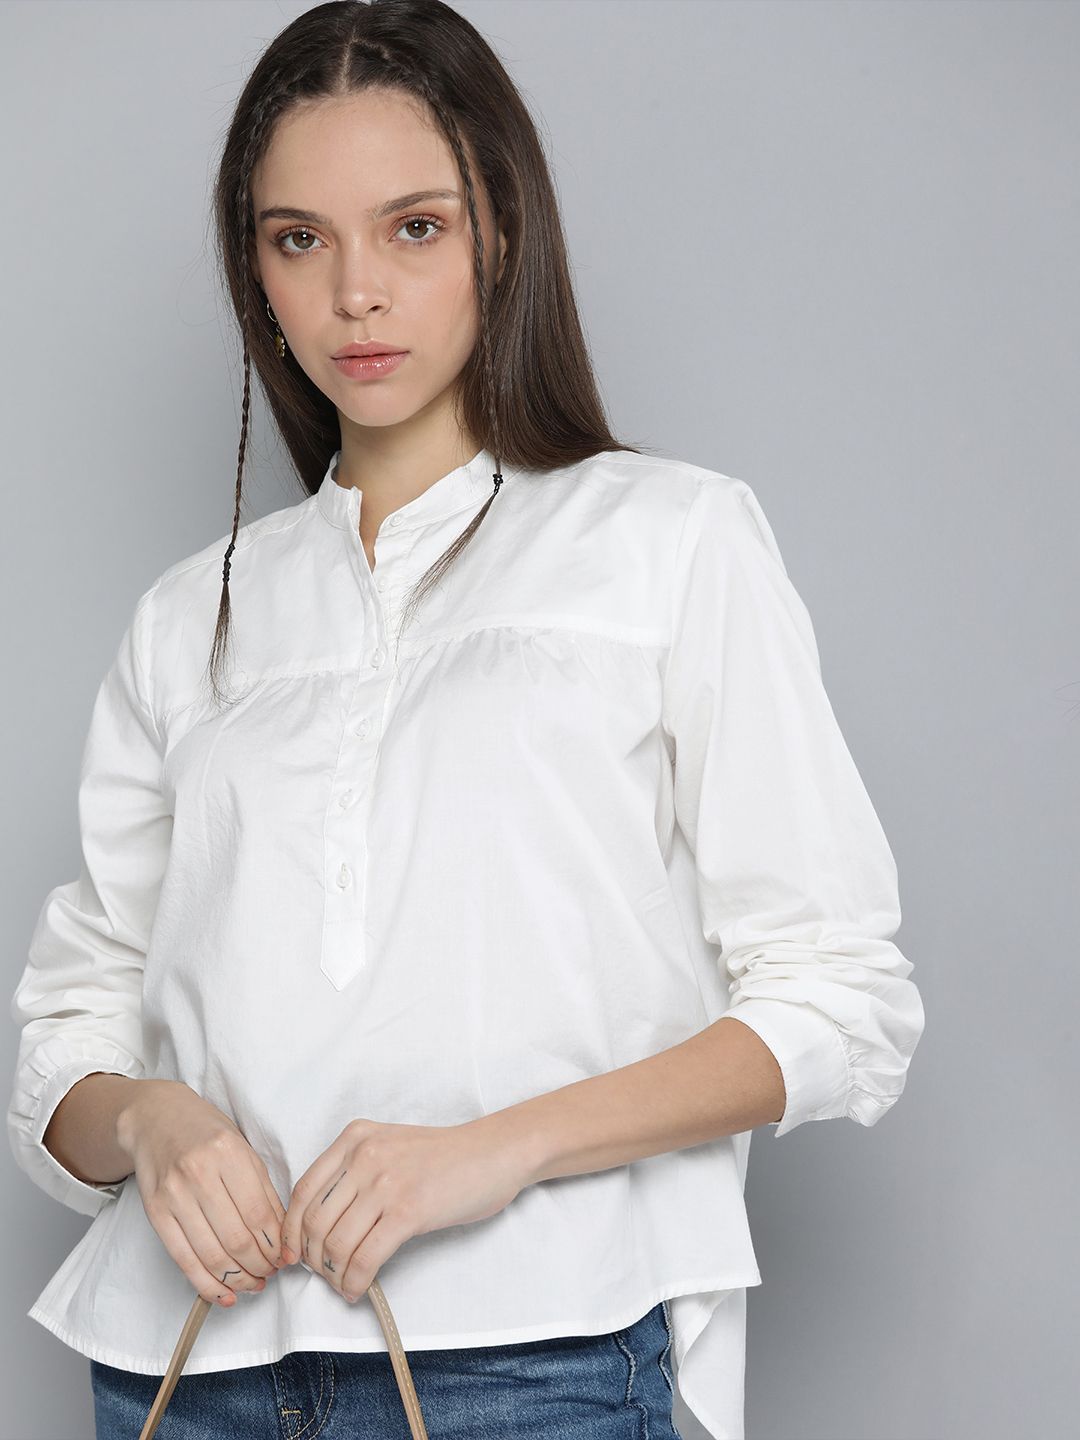 Levis Off White Mandarin Collar High Low Shirt Style Top Price in India